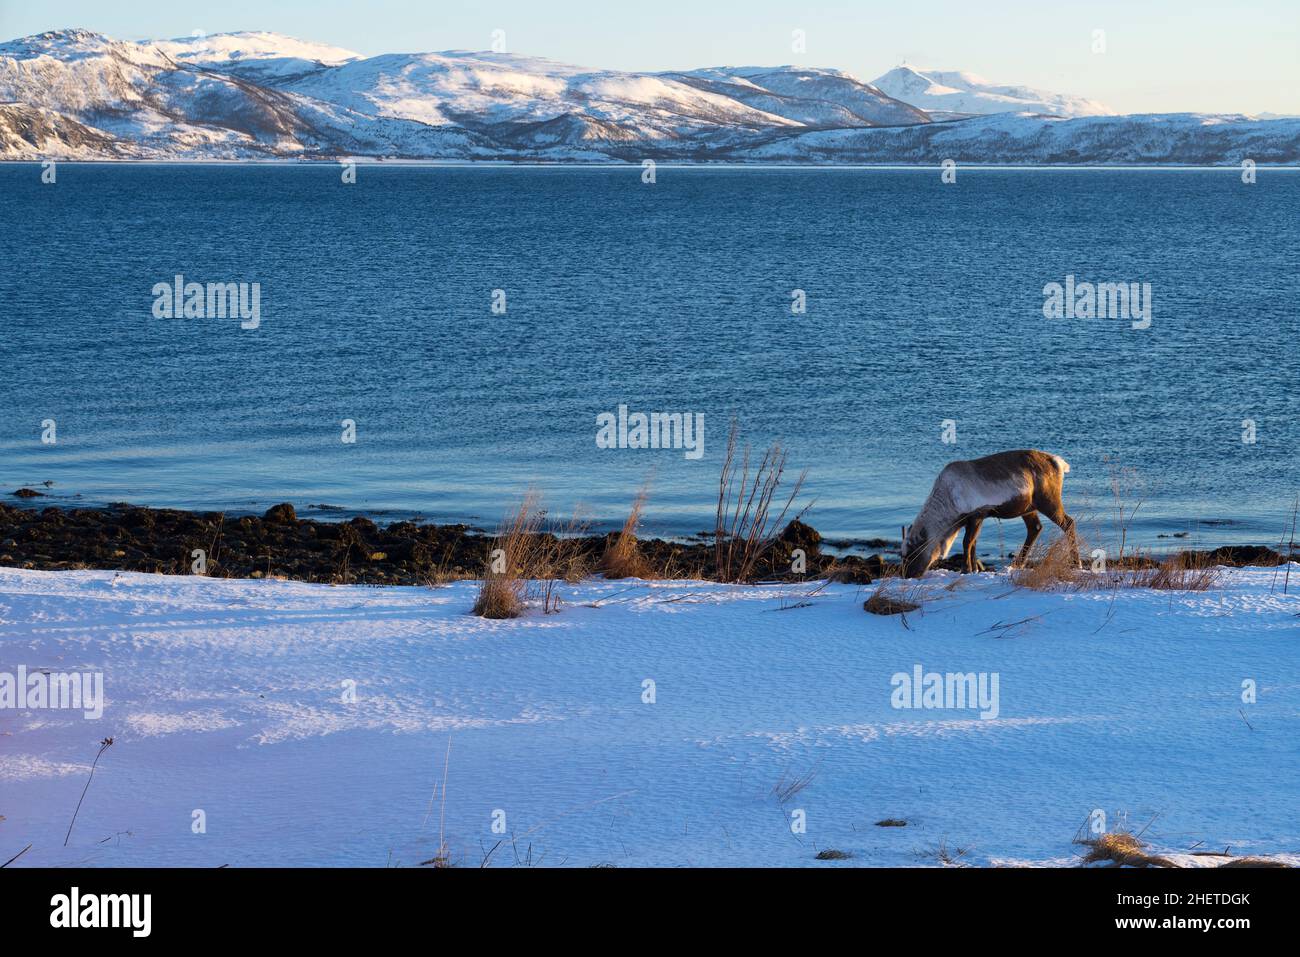 Reindeer in its natural environment eating in the snow on the edge  of a fjord in Brensholmen, near Tromso Norway Scandinavia Stock Photo